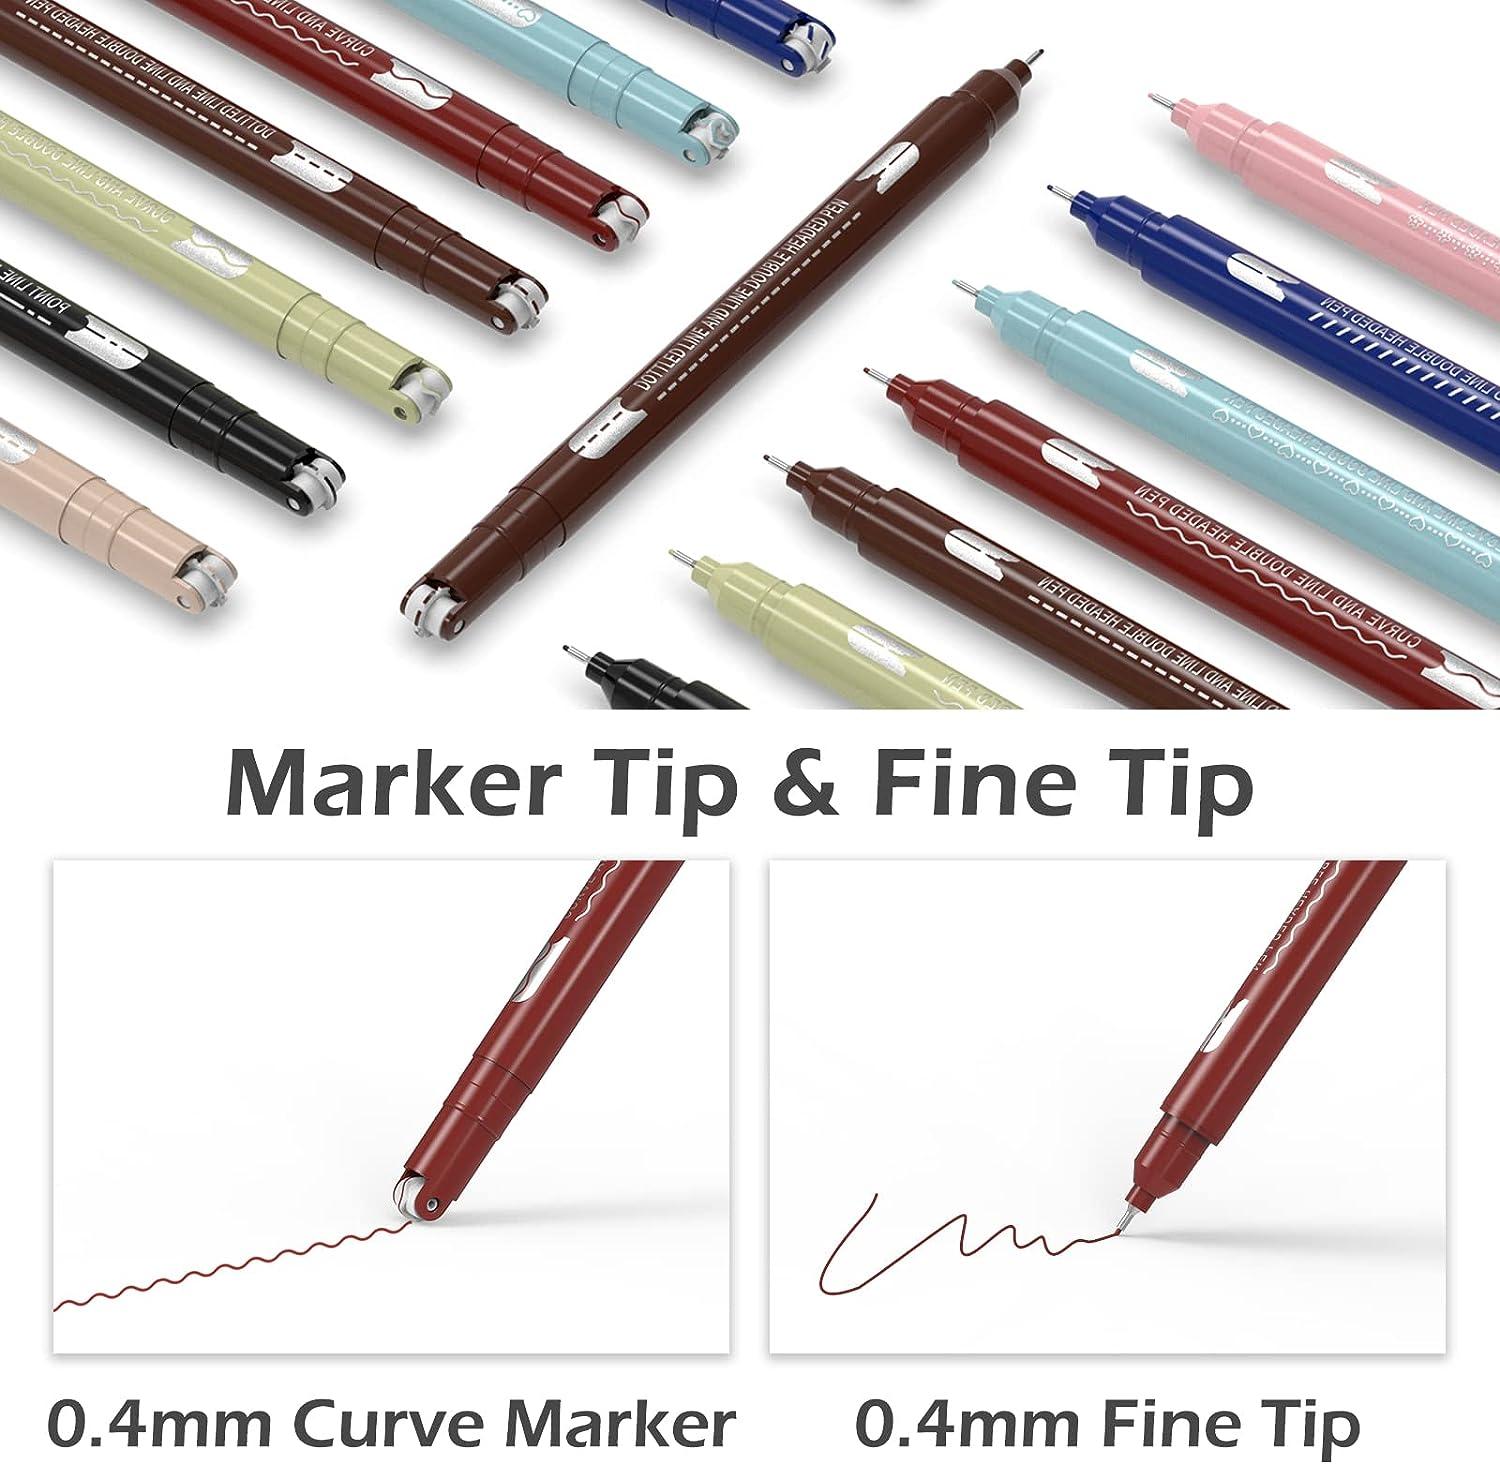 Hehimin Childen-Dual Tip Pens With 6 Different Curve Shapes Colored Writing  Markers, Colored Fine Tip Pens For Writing Journaling Planner Coloring